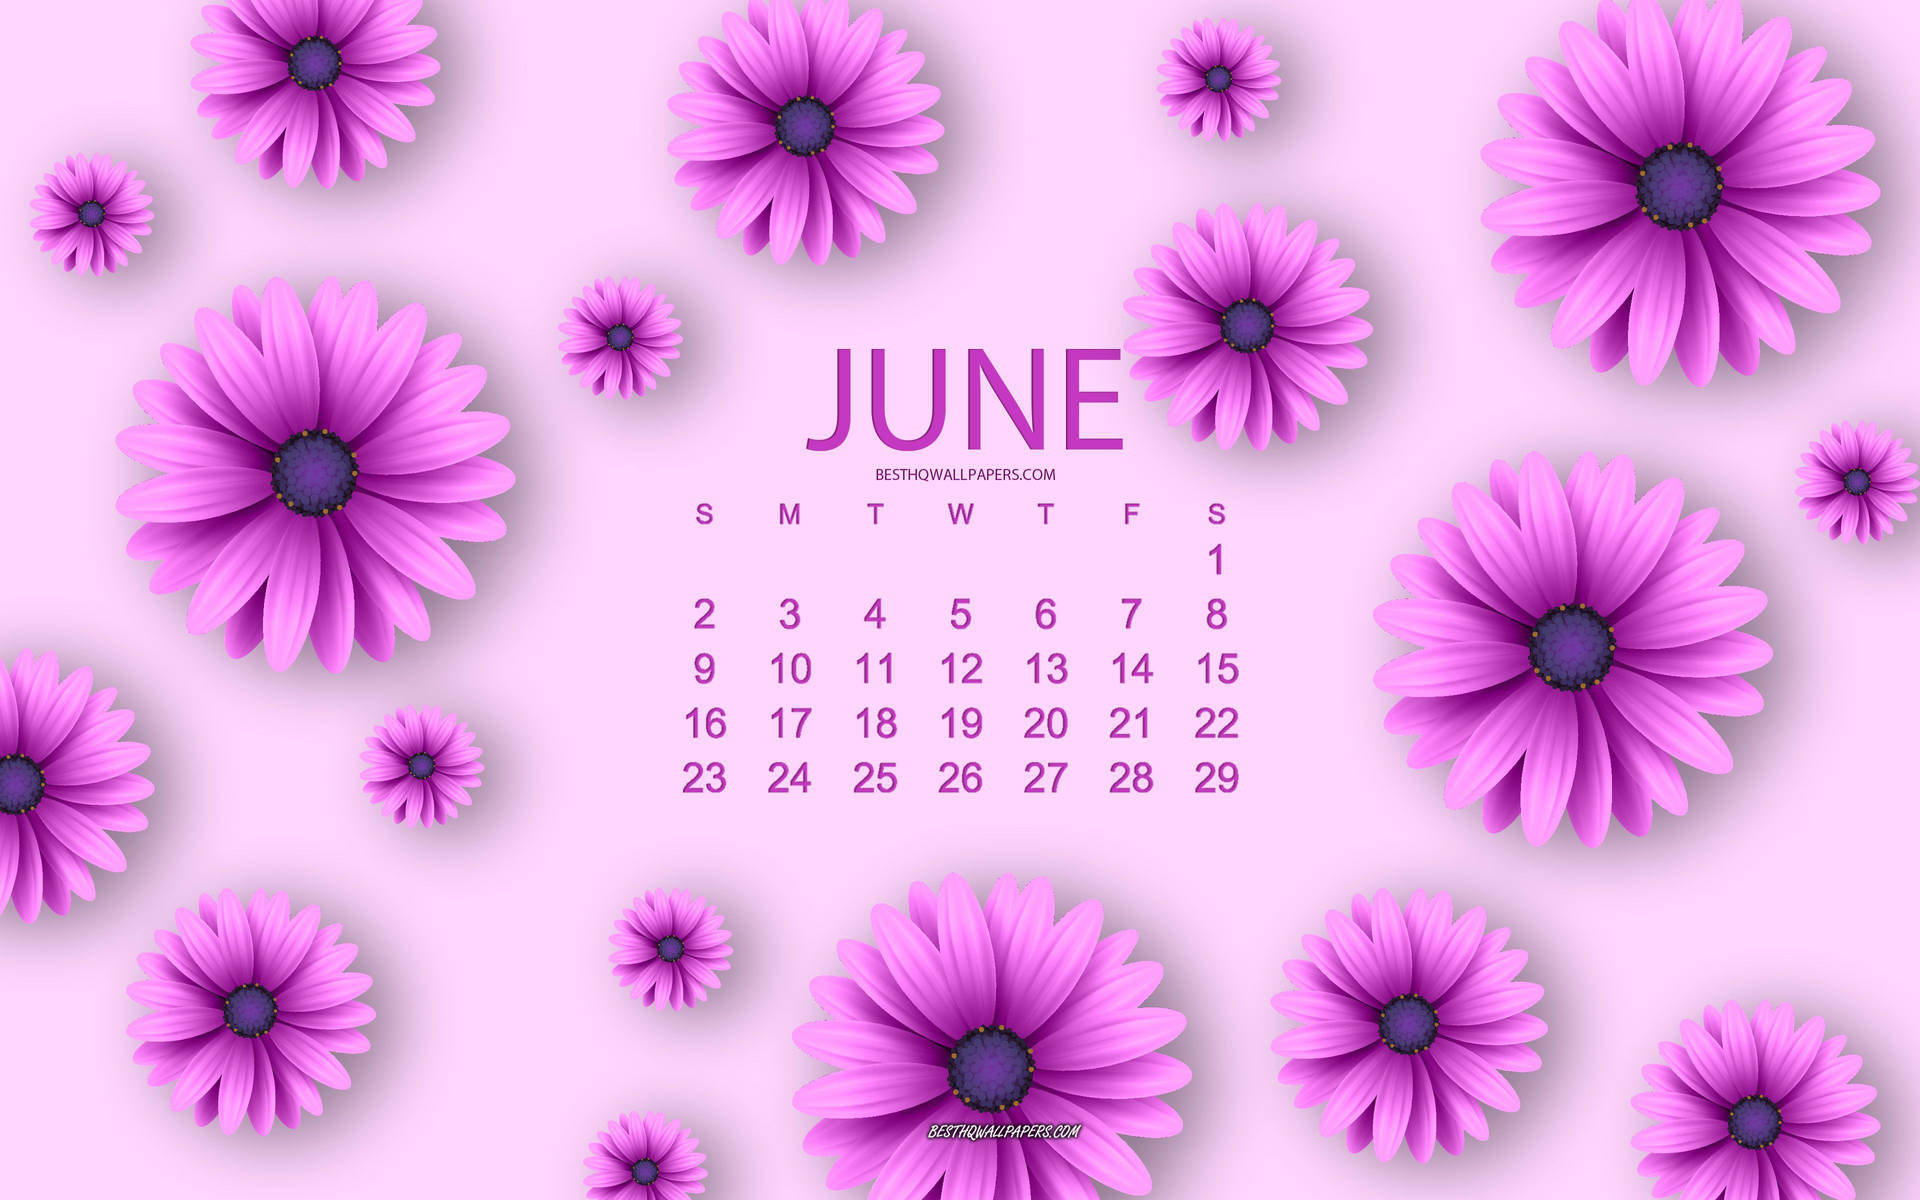 'Welcome June with Blooming Lavender Fields'. Wallpaper